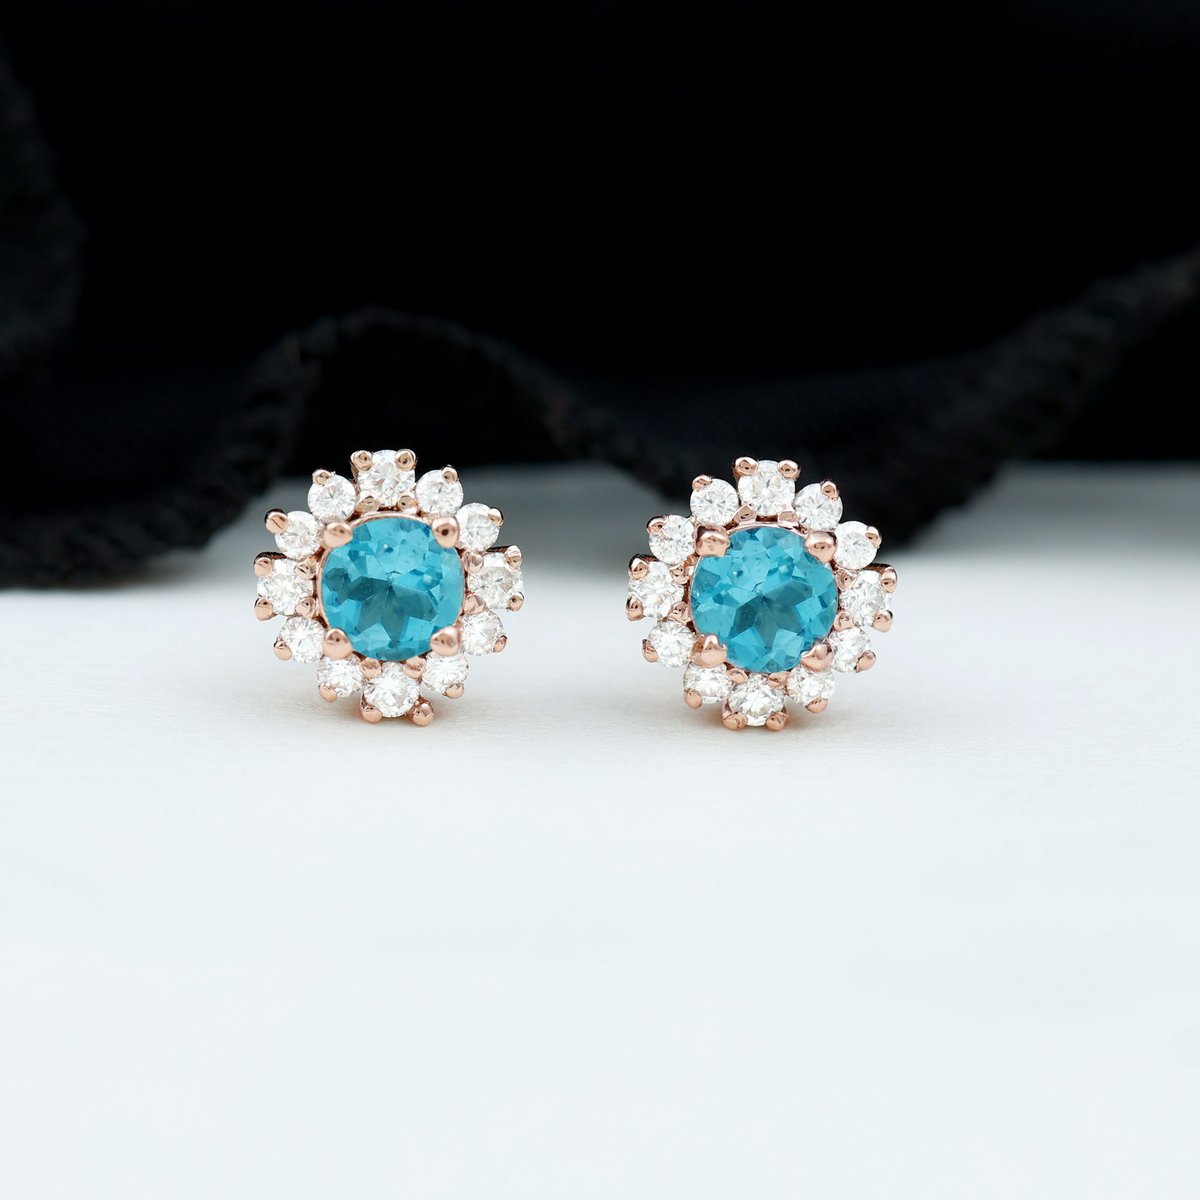 Bringing 'Gem of the Sea' for the tranquil and serene in you! 💙🎁

rosecjewels.com/products/1-ct-… 

#aquamarinejewelry #aquamarineearrings #studearrings #solitaireearrings #lightbluejewelry #finejewelry #aquamarinelove #handmadejewelry #instajewelry #earrings